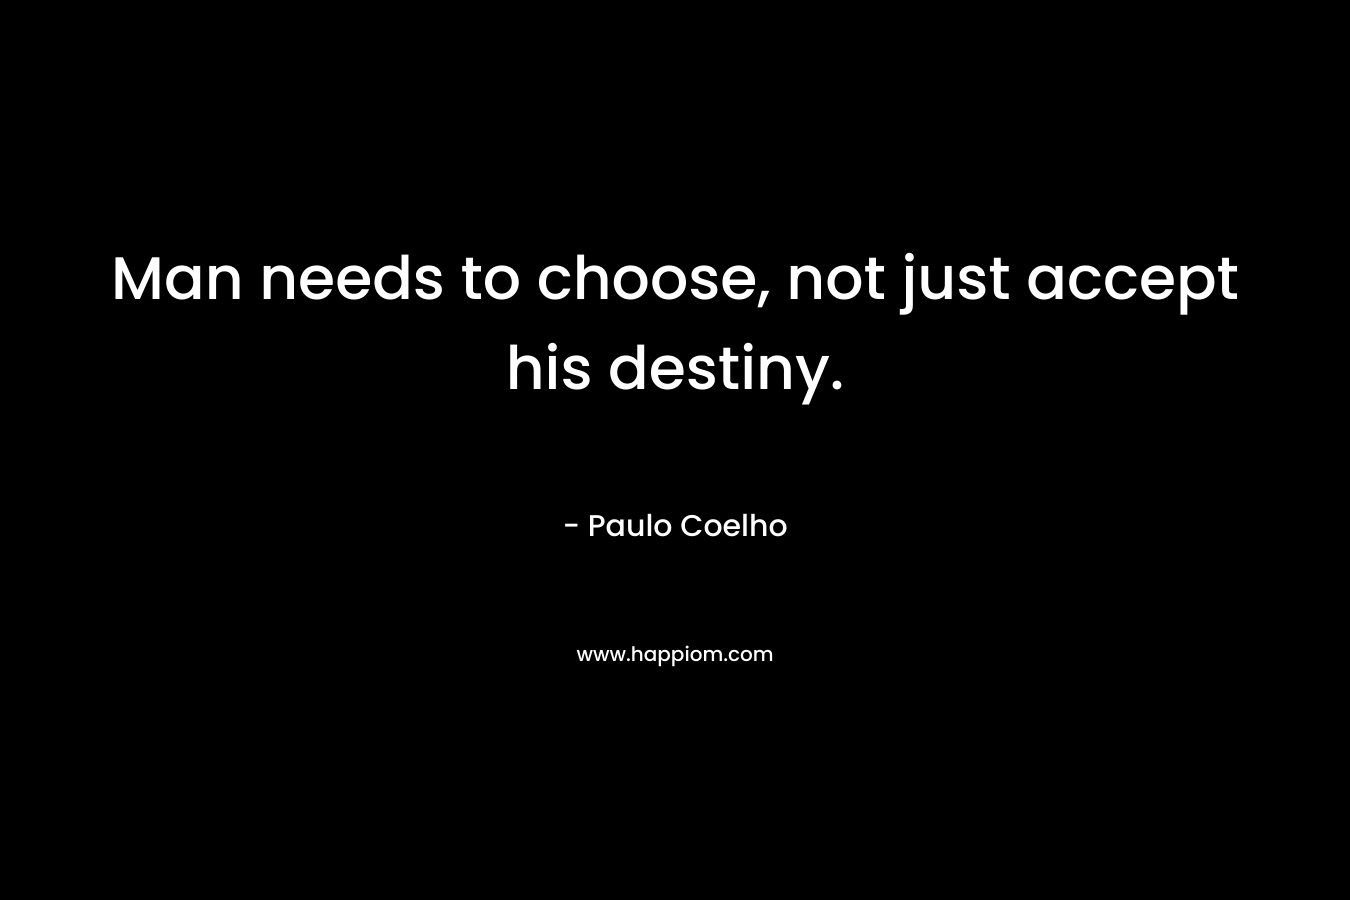 Man needs to choose, not just accept his destiny.